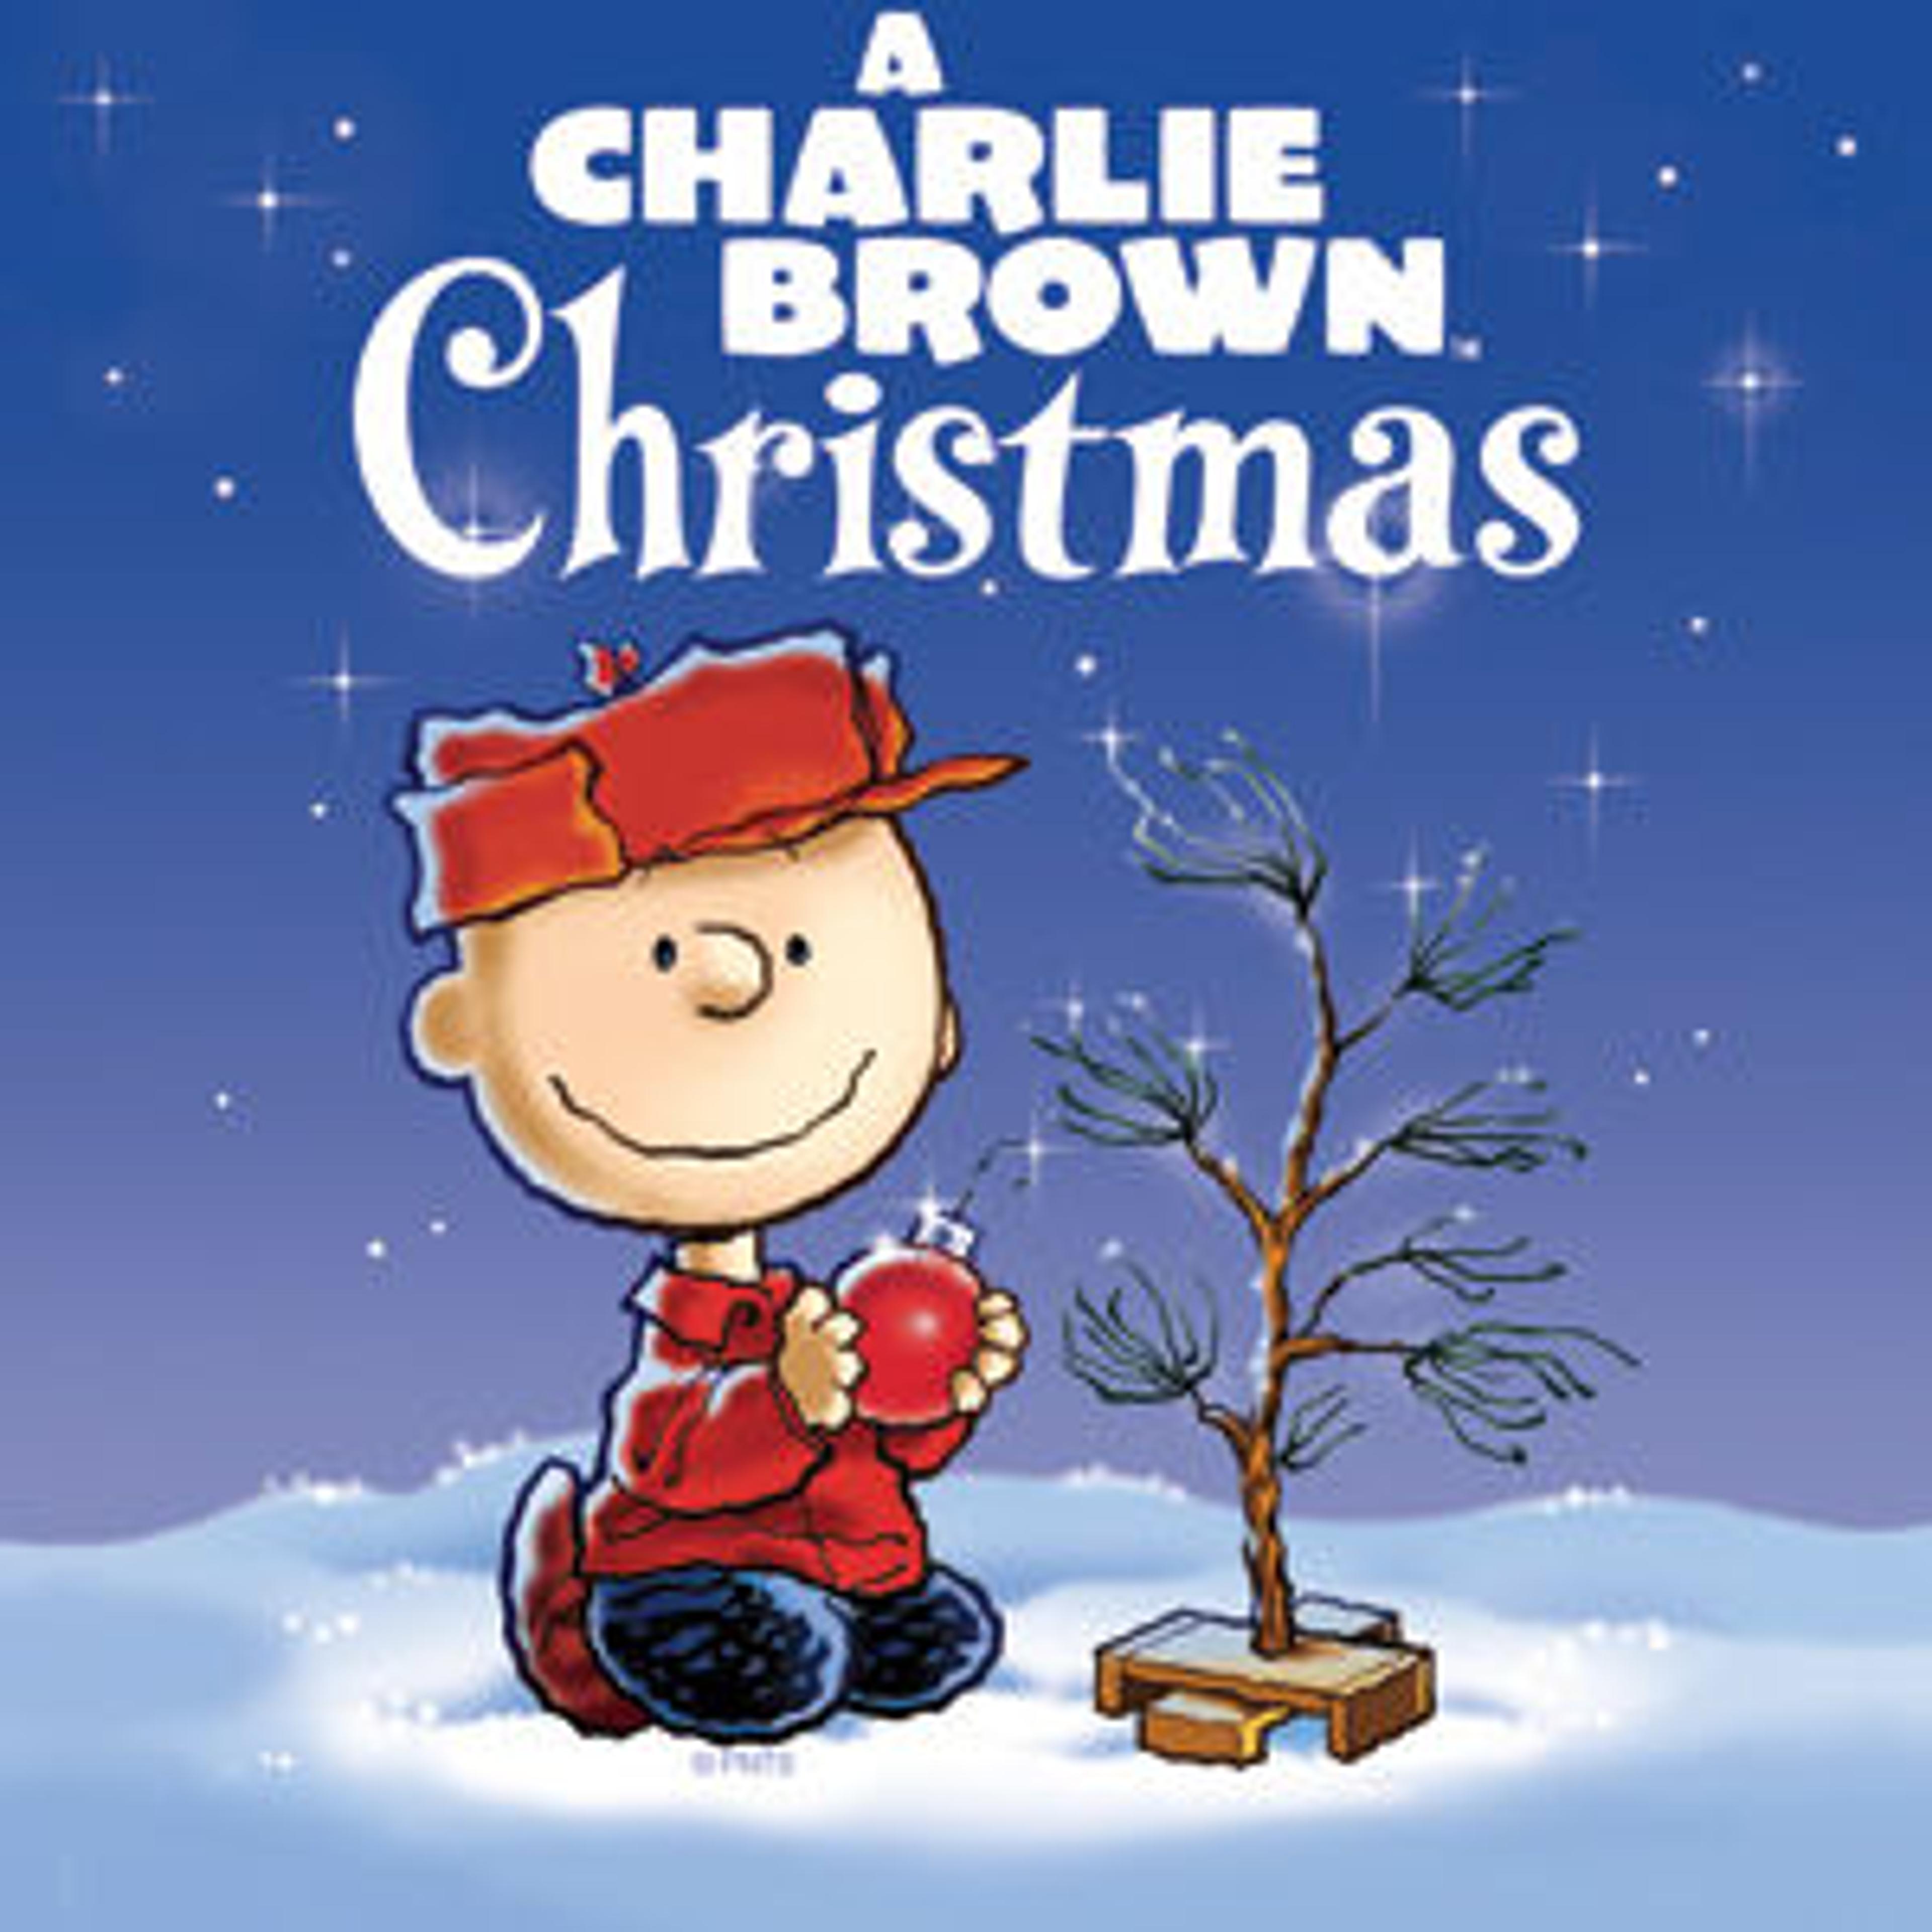 A Charlie Brown Christmas Courtesy of Lee Mendelson and Bill Melendez Productions © 2014 Peanuts Worldwide LLC